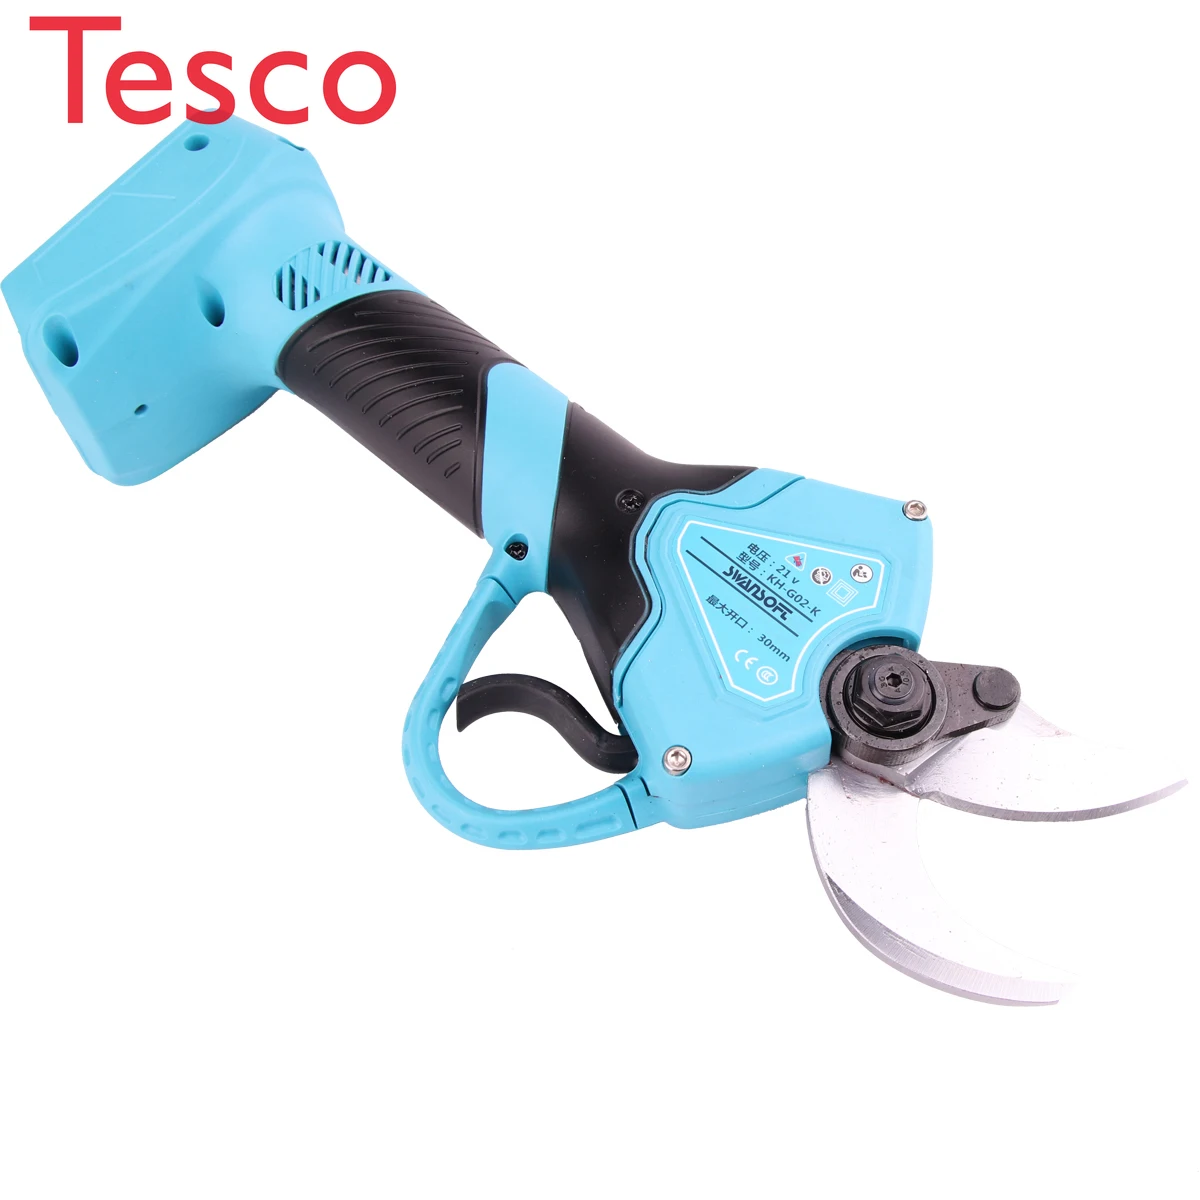 

Cordless electric pruning shear for garden pruner working time 6 hours